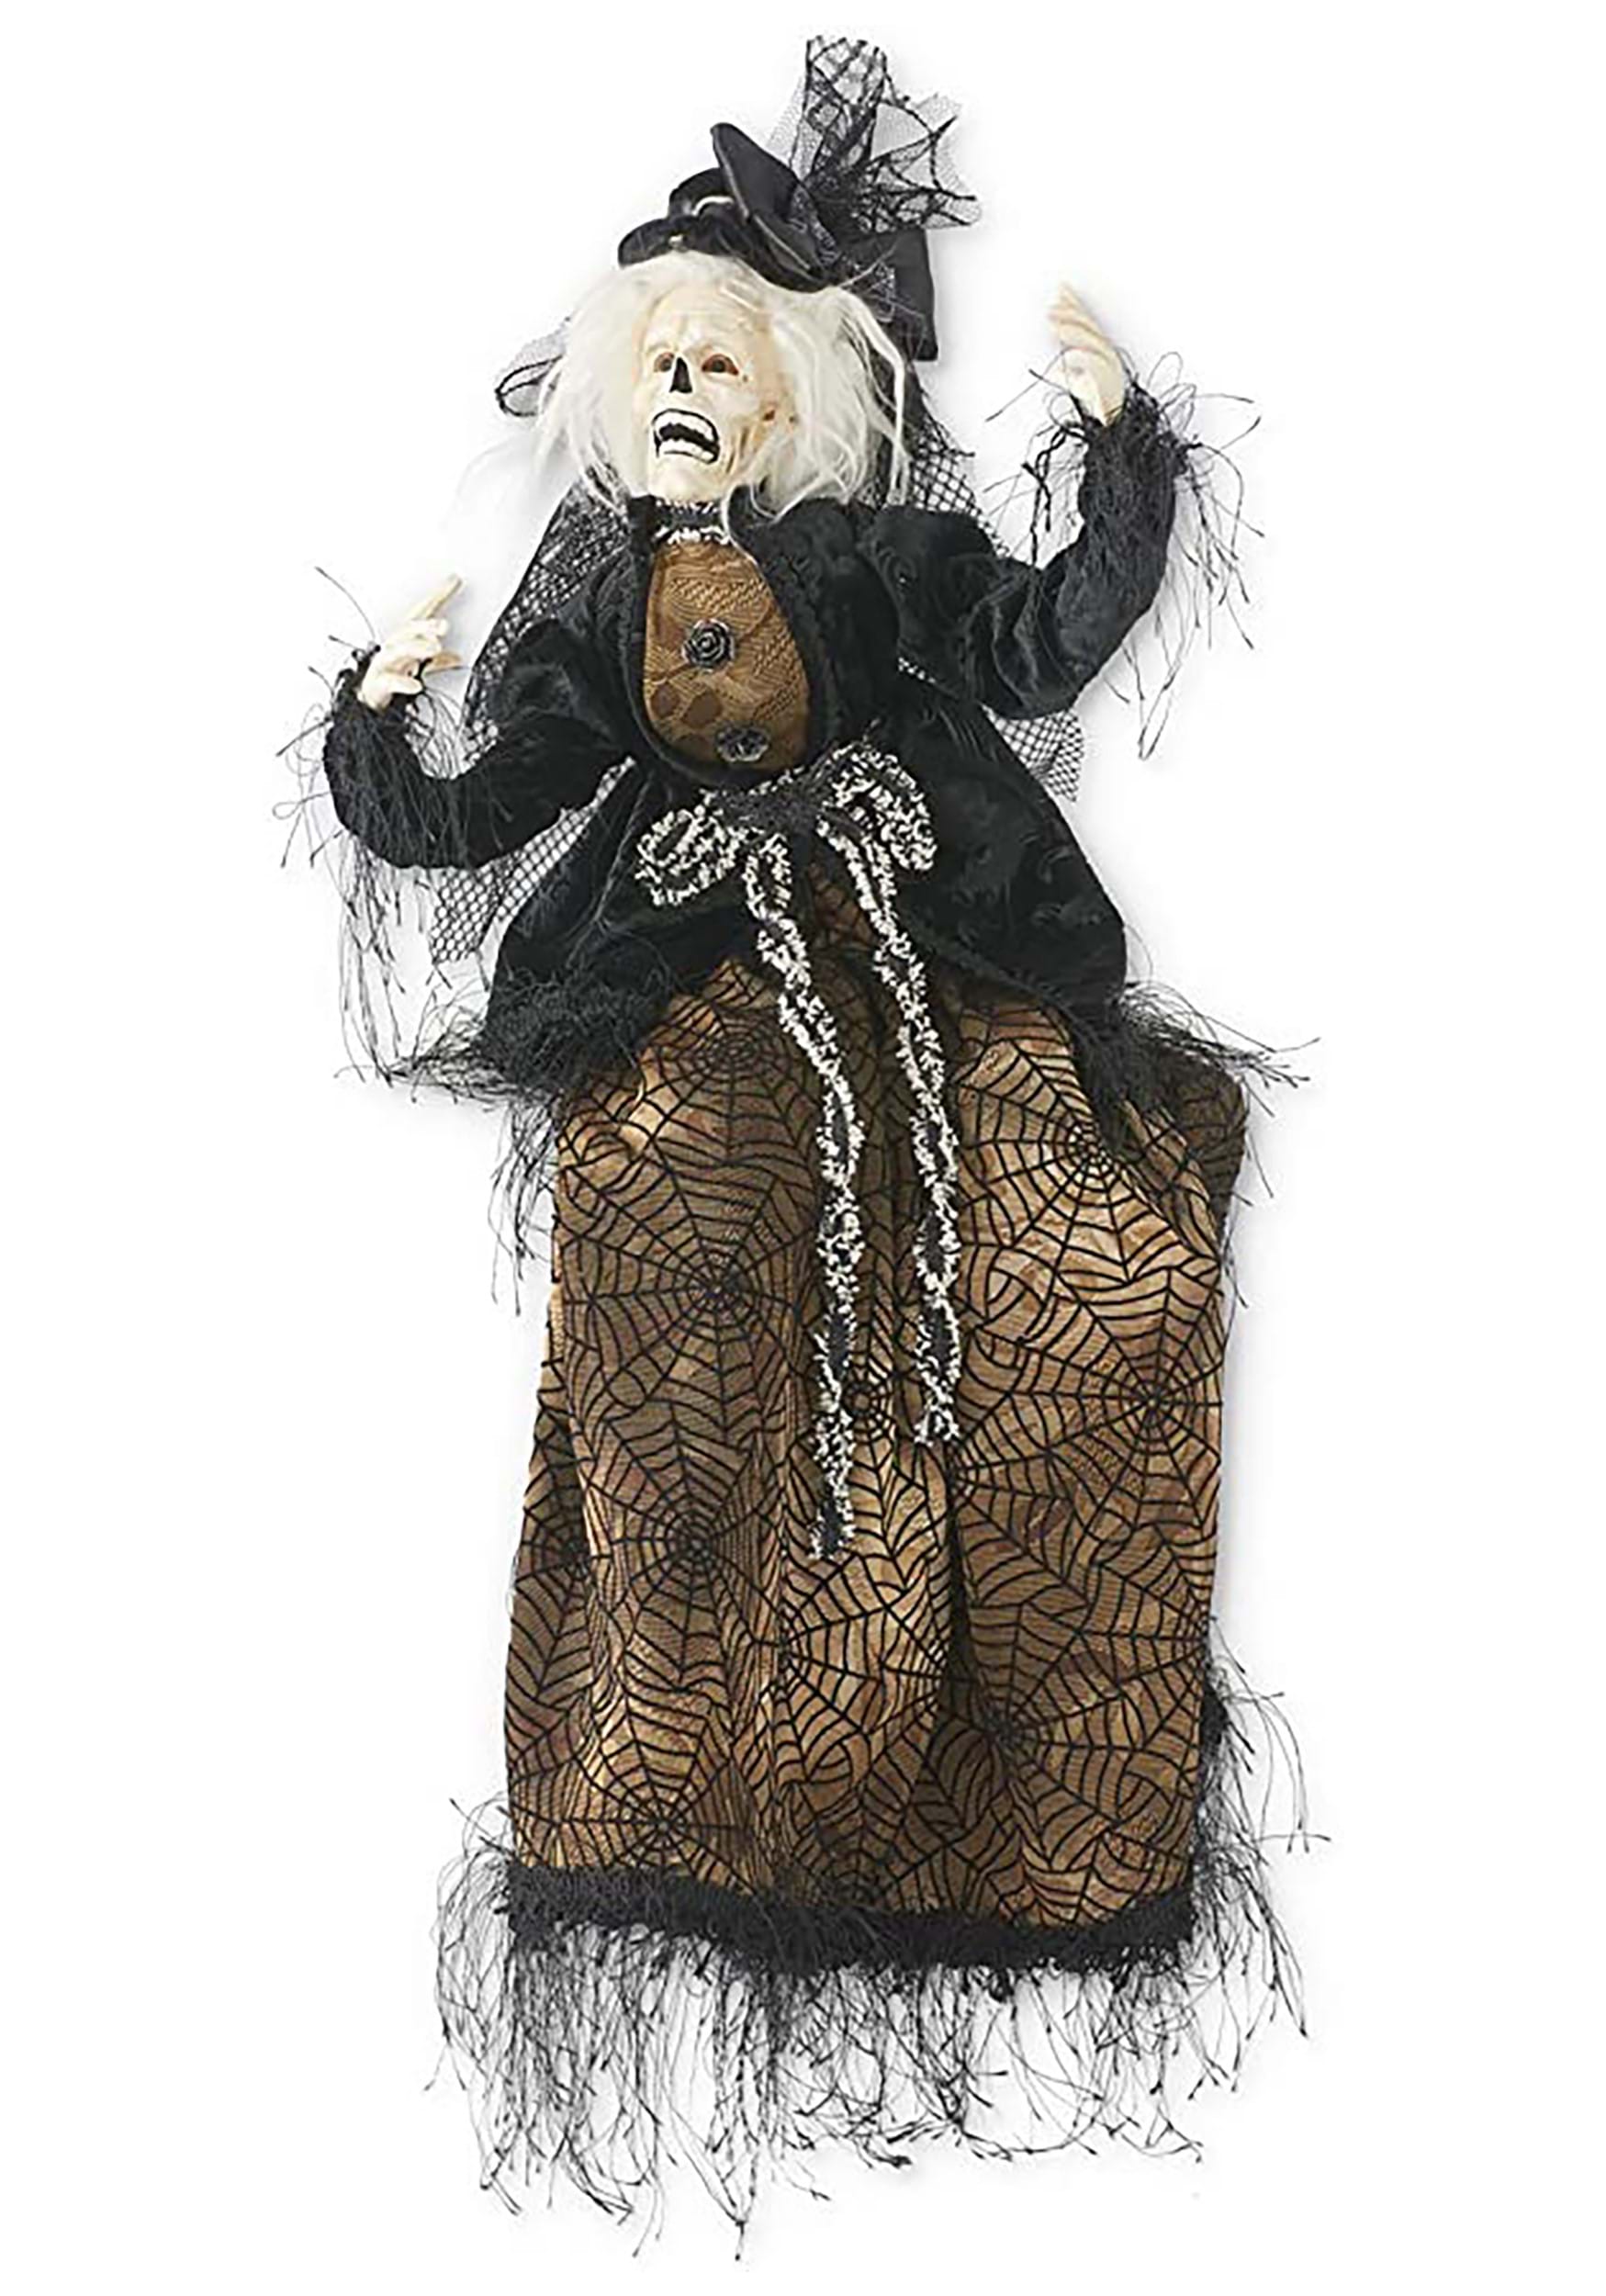 25-Inch Posable Sitting Zombie Lady Halloween Prop , Zombie Decorations